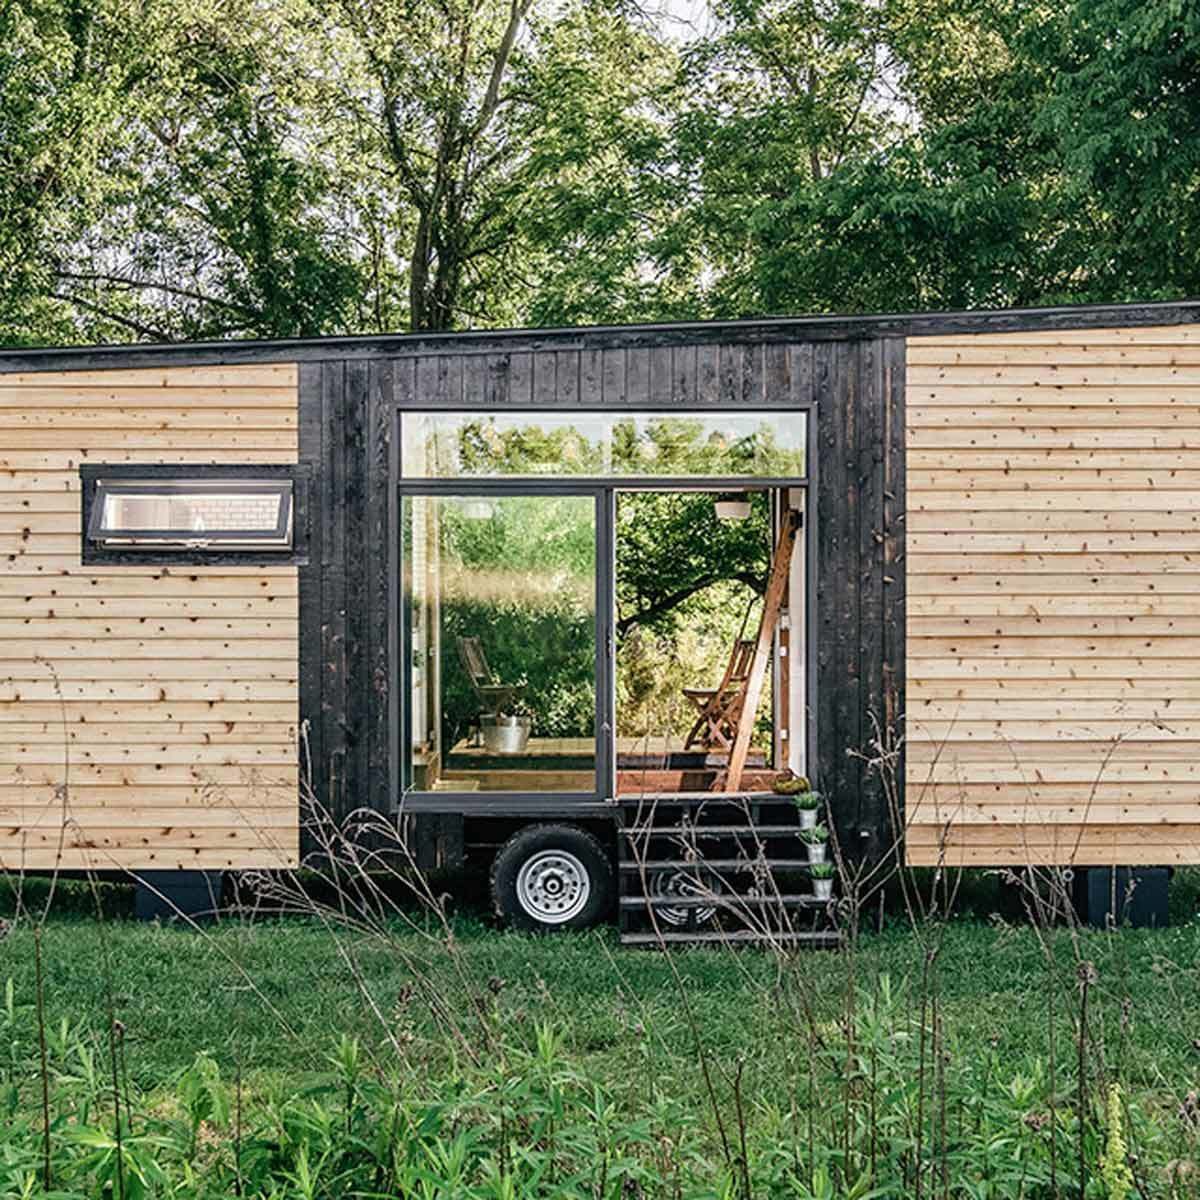 Inside a Tiny House With a Pop-Out Deck - Alpha Tiny Home by New